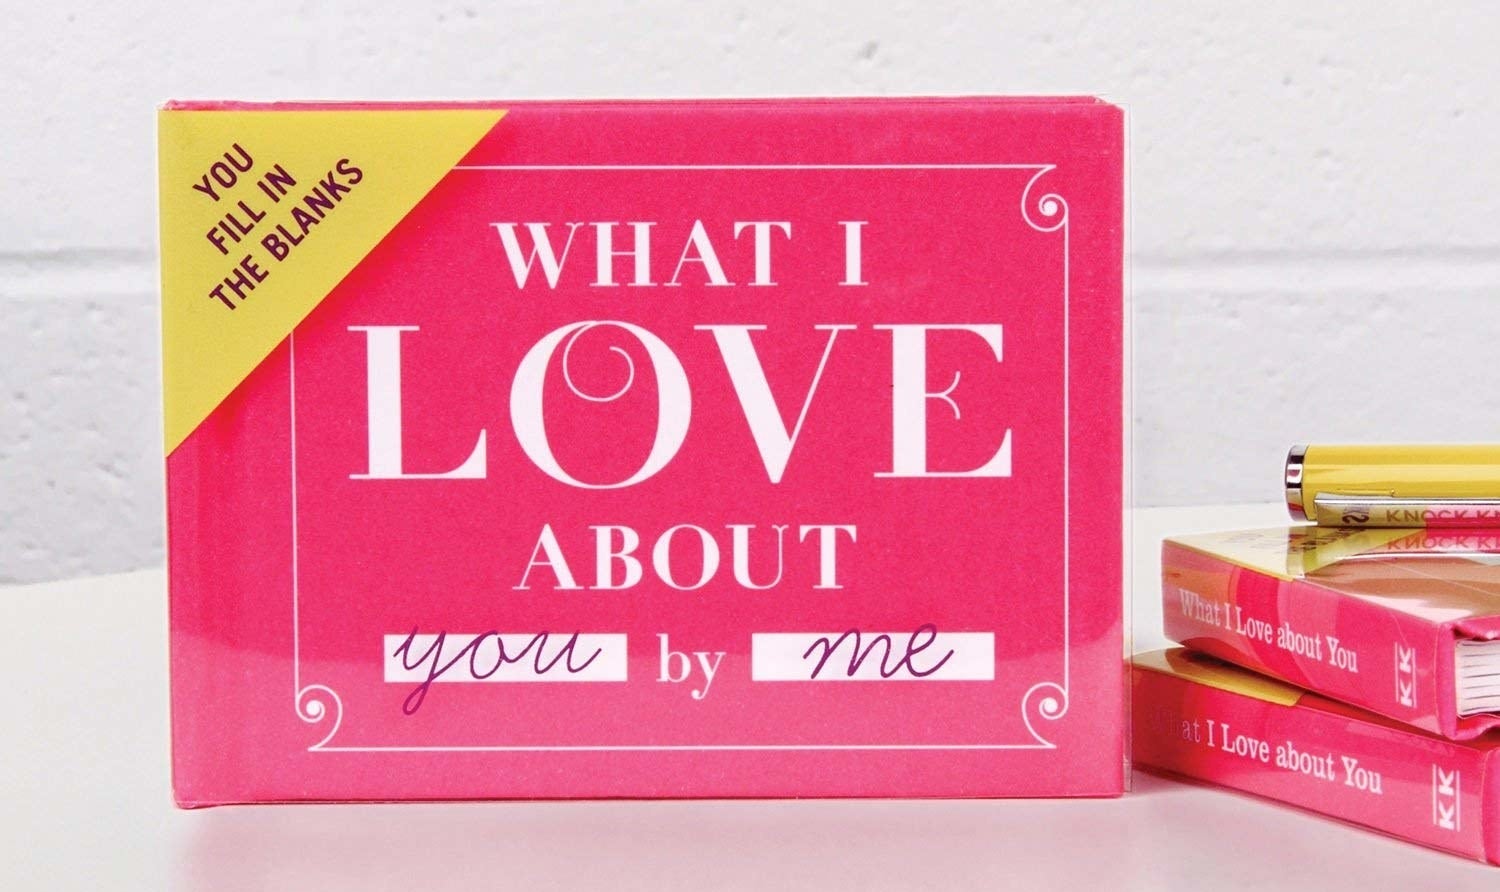 Small pink book called &quot;What I Love About You by Me&quot; and the message &quot;You fill in the blanks&quot; in the upper-left corner.  